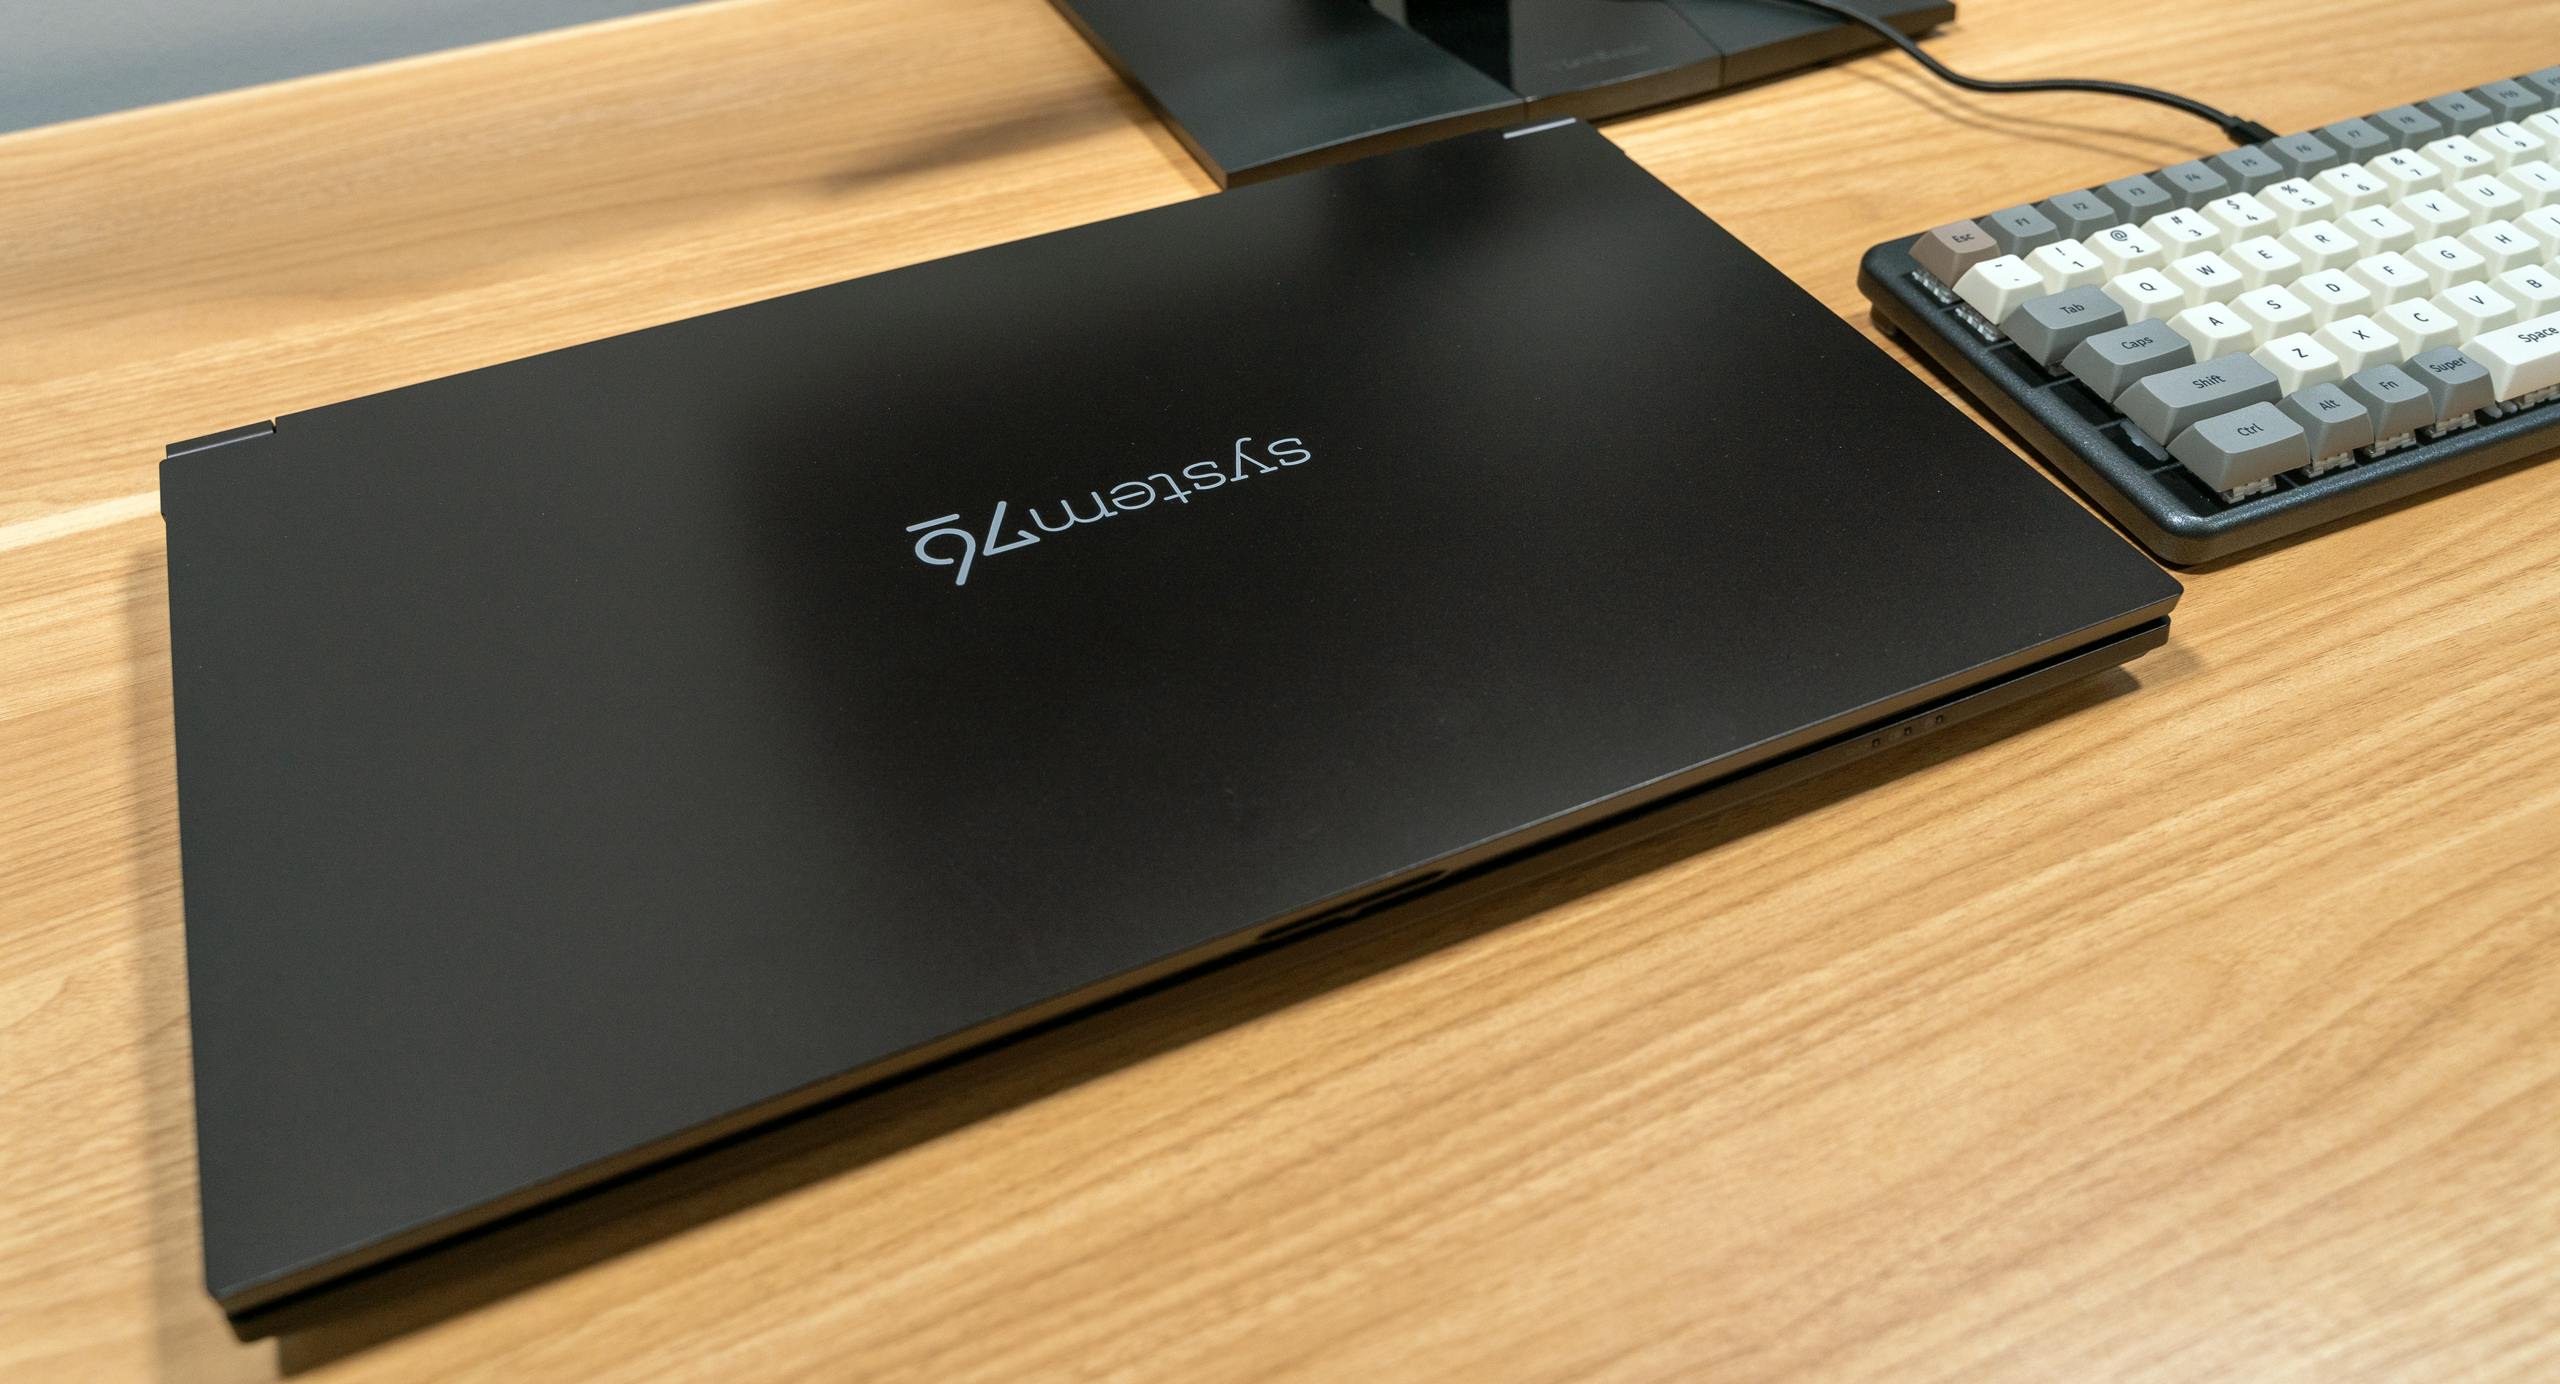 The Gazelle laptop on a desk next to a computer launch keyboard and external monitor.  